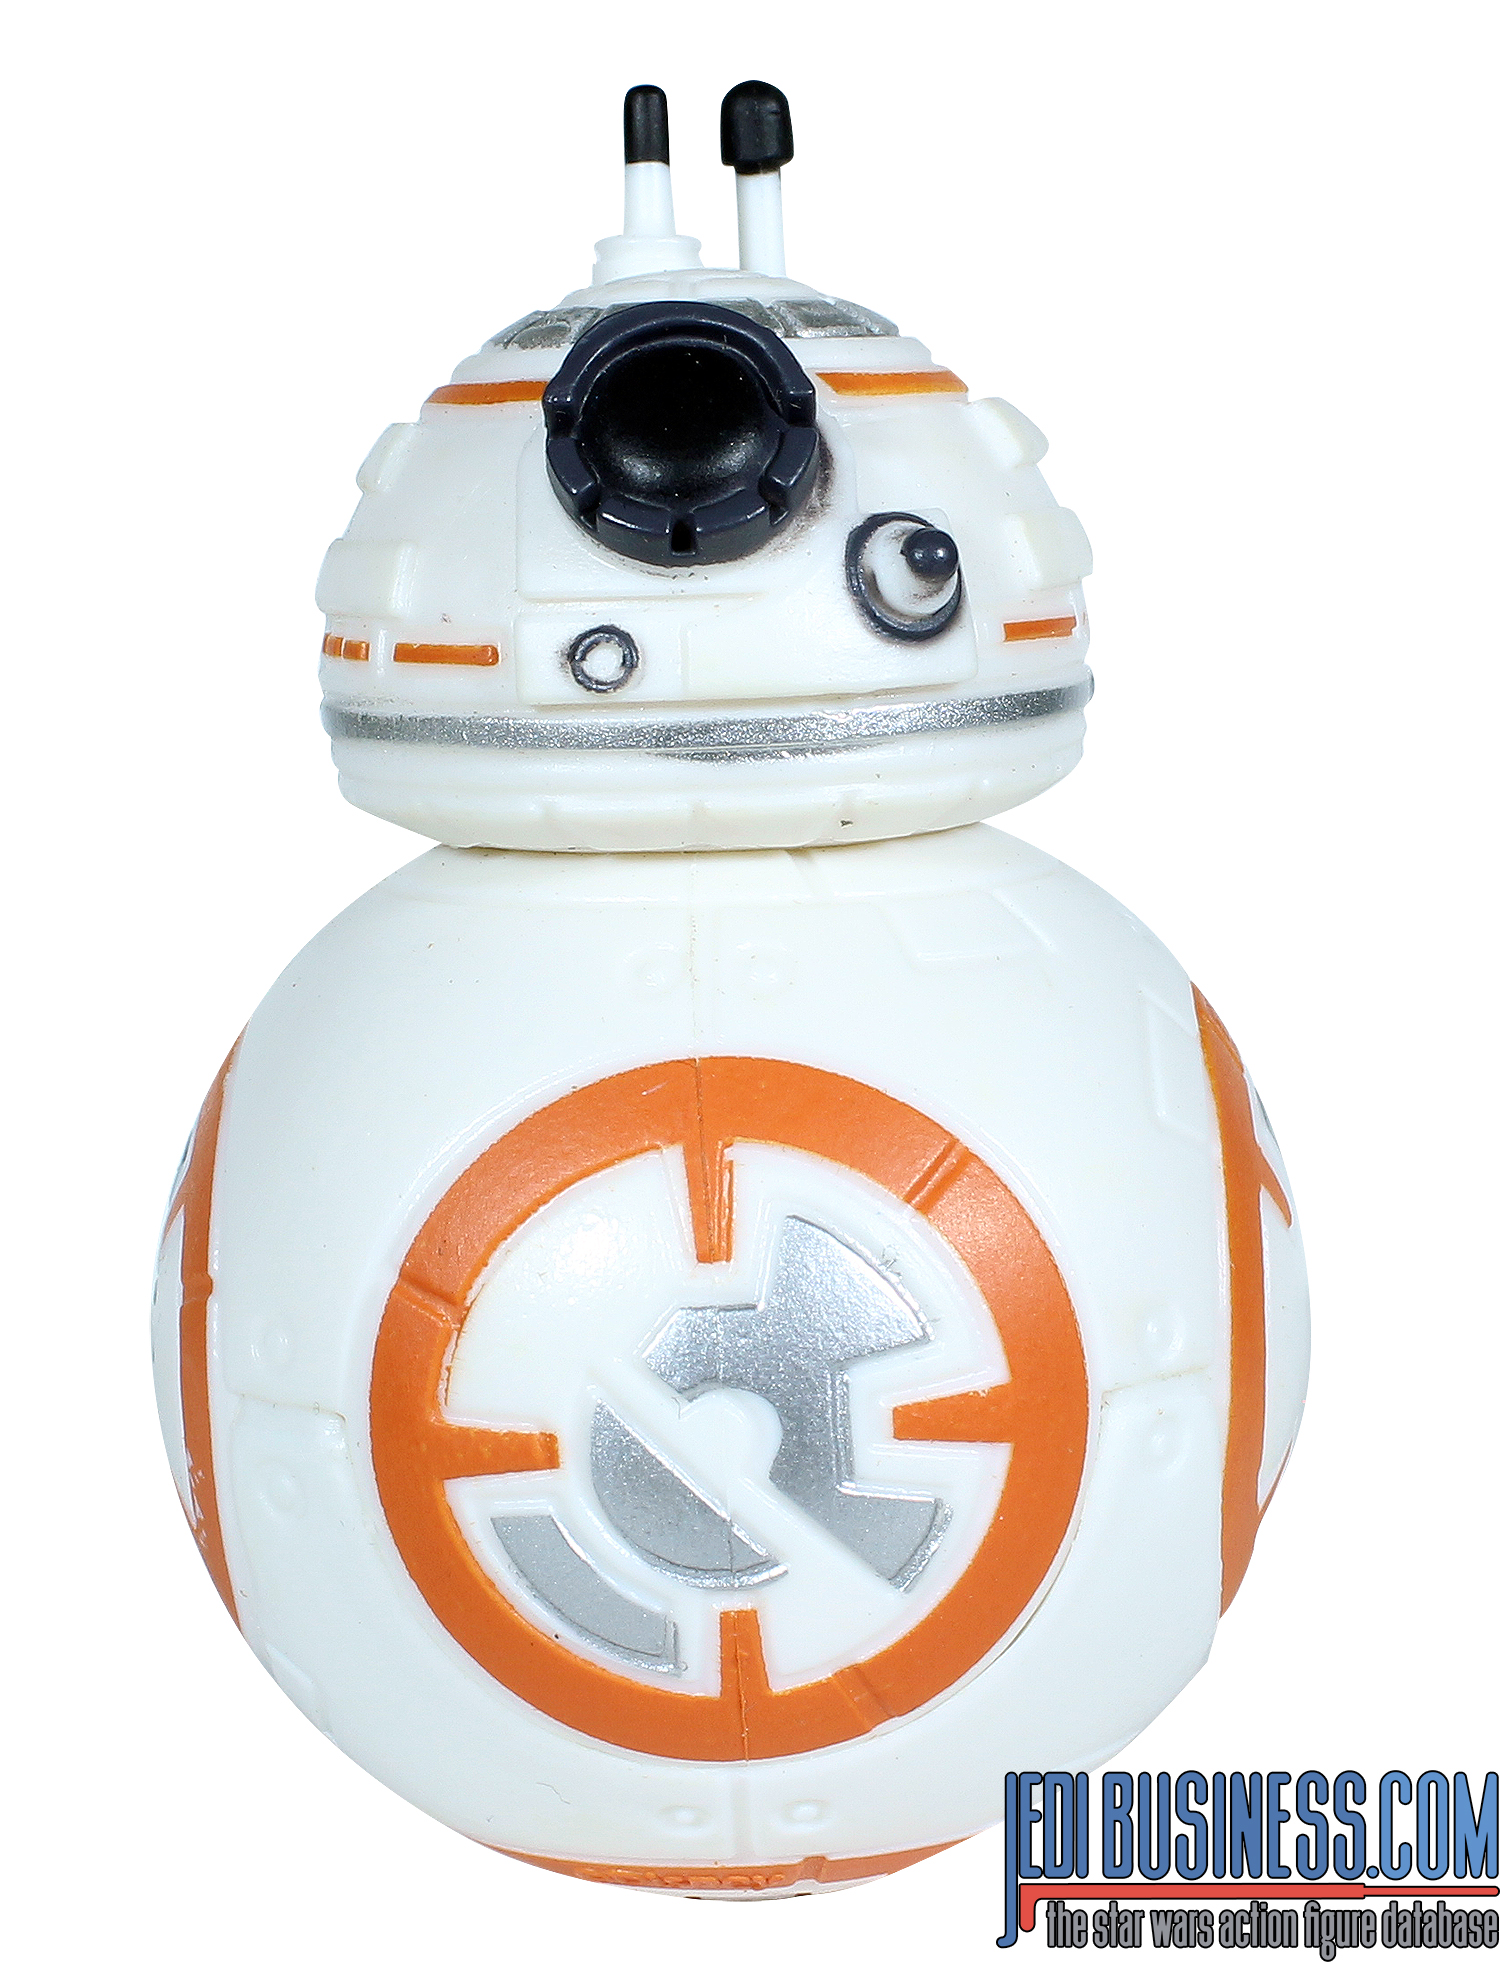 BB-8 With Rey, D-0 And Millennium Falcon